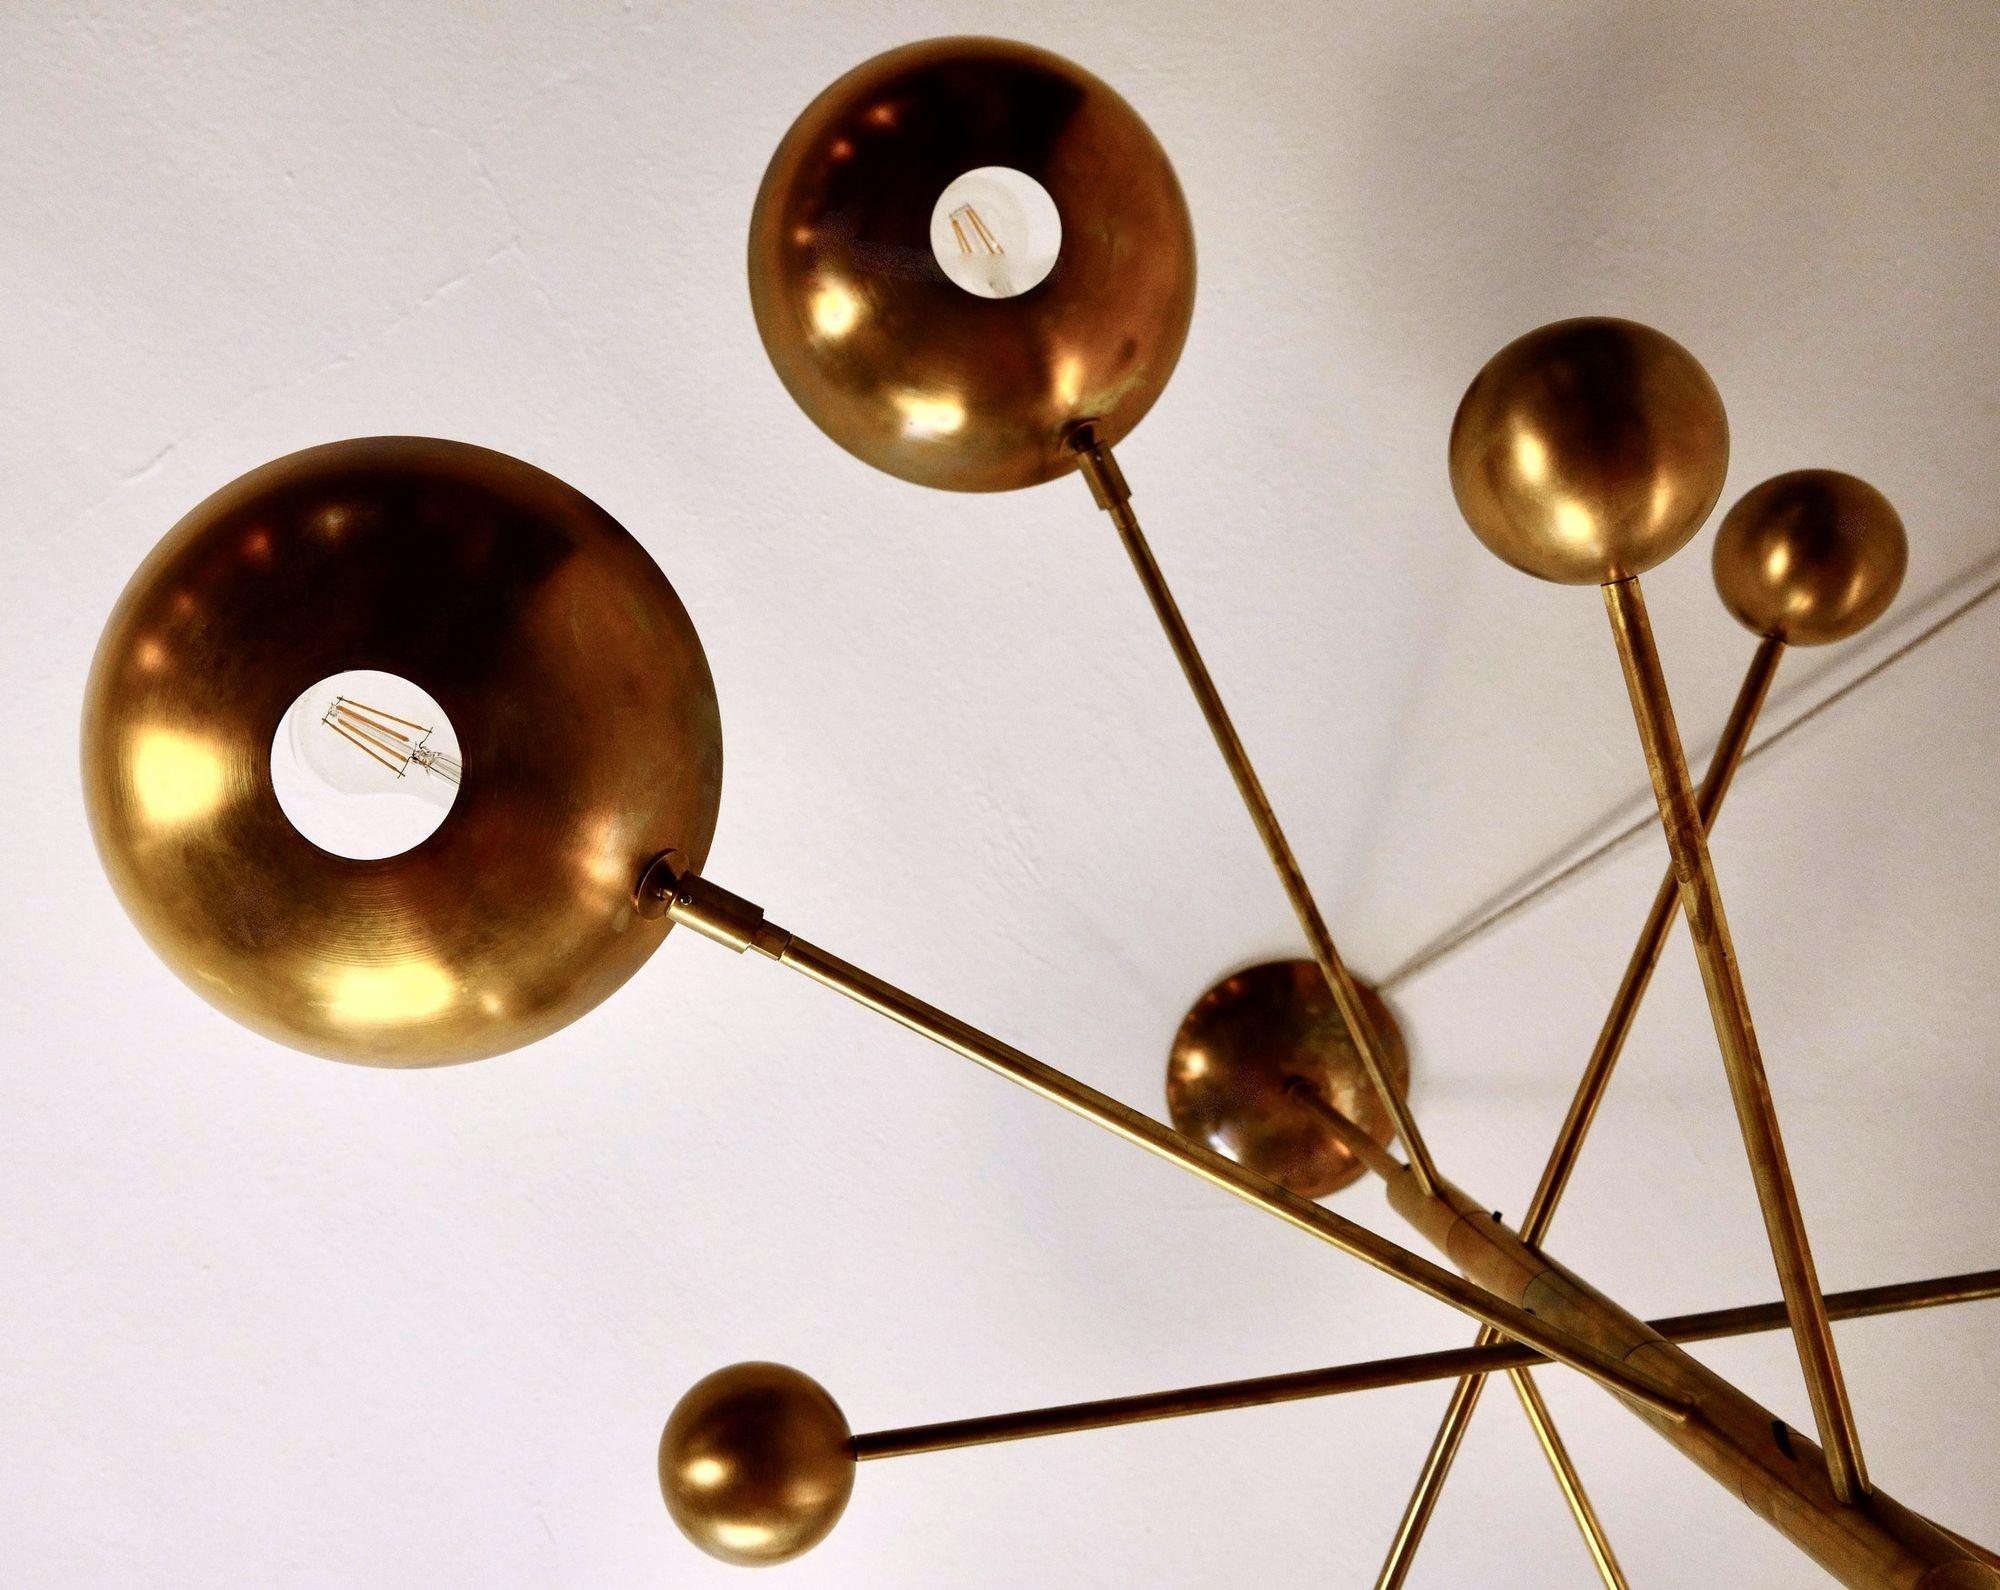 Orbitale Brass Chandelier 5 Rotating Balanced Arms, All Brass and Natural Patina For Sale 4